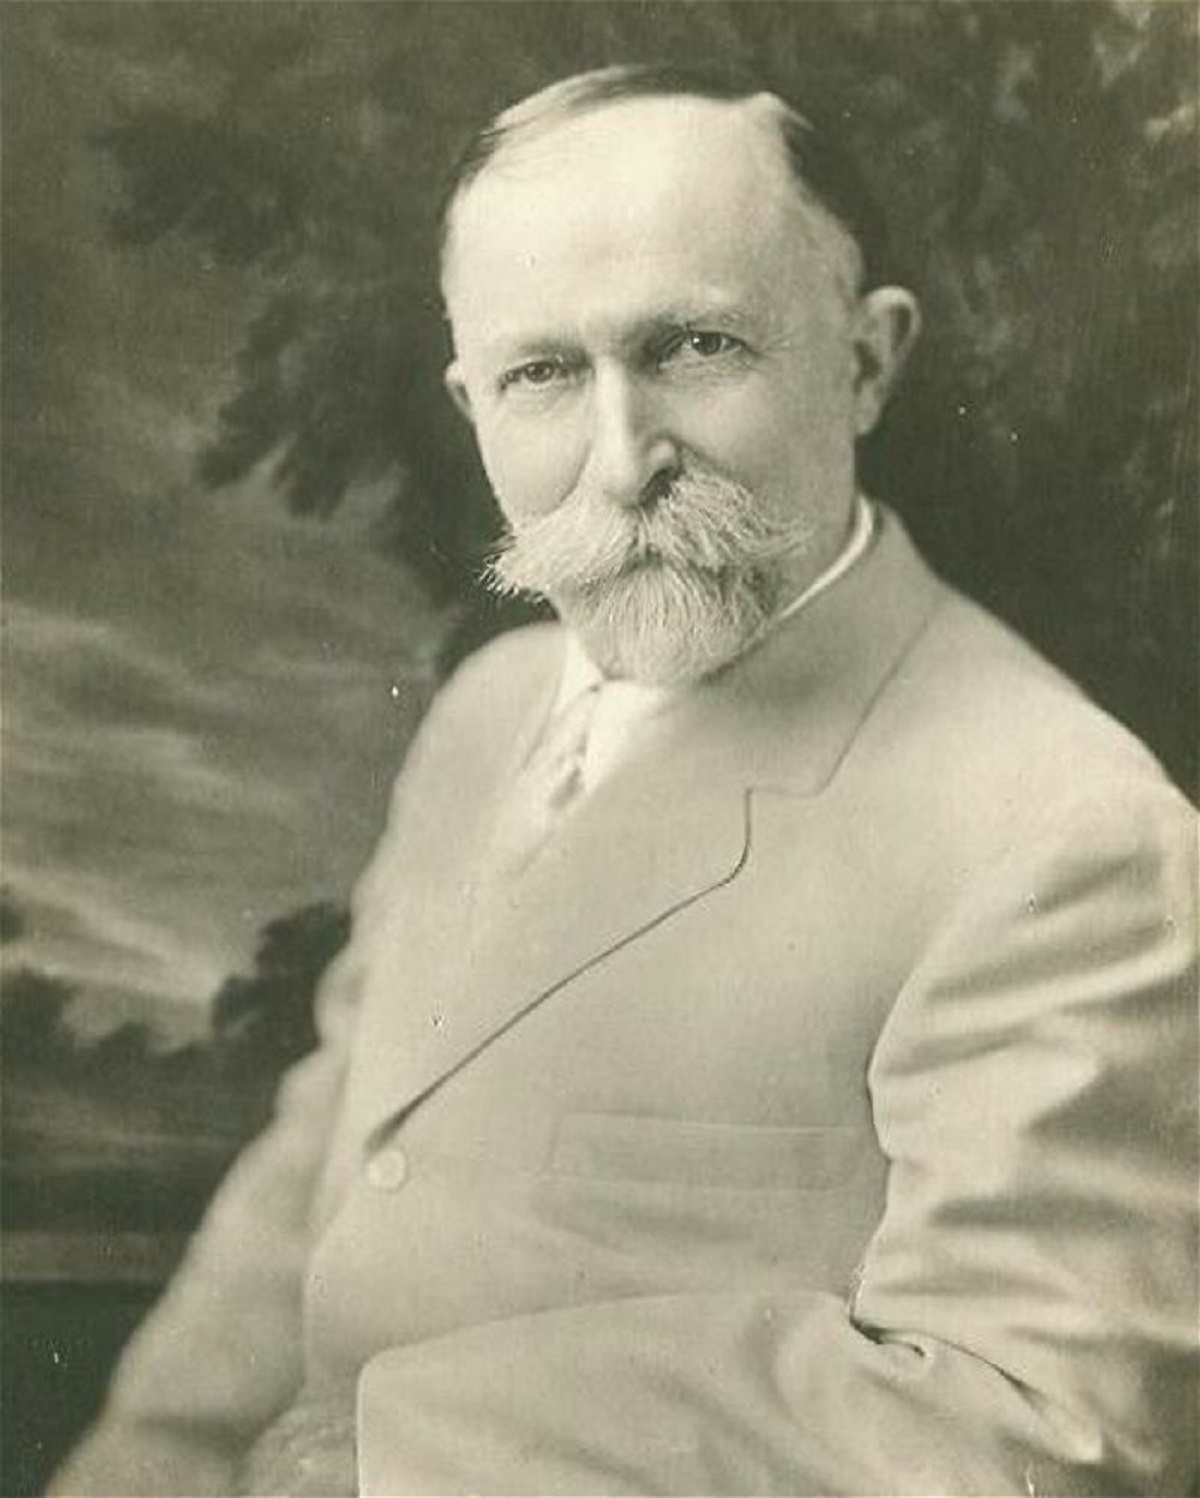 John Harvey Kellogg (the cereal guy) was a real piece of work.

TLDR; John Harvey Kellog was the cook, and his brother was the industrialist.
As far as I can remember, the insane brother invented the cereal. The sane brother invented the factory process of making them, and had the idea to cover them in sugar (frosted flakes).
The insane Kellog believed that the default state of man was an apathetic unfeeling void and anything that caused excitement such as good food, warm baths, obviously intercourse for anything other than procreation, was sinful and against God's design. I believe he was also a proponent of yoghurt enemas, which HAS to be a fetish thing, right?